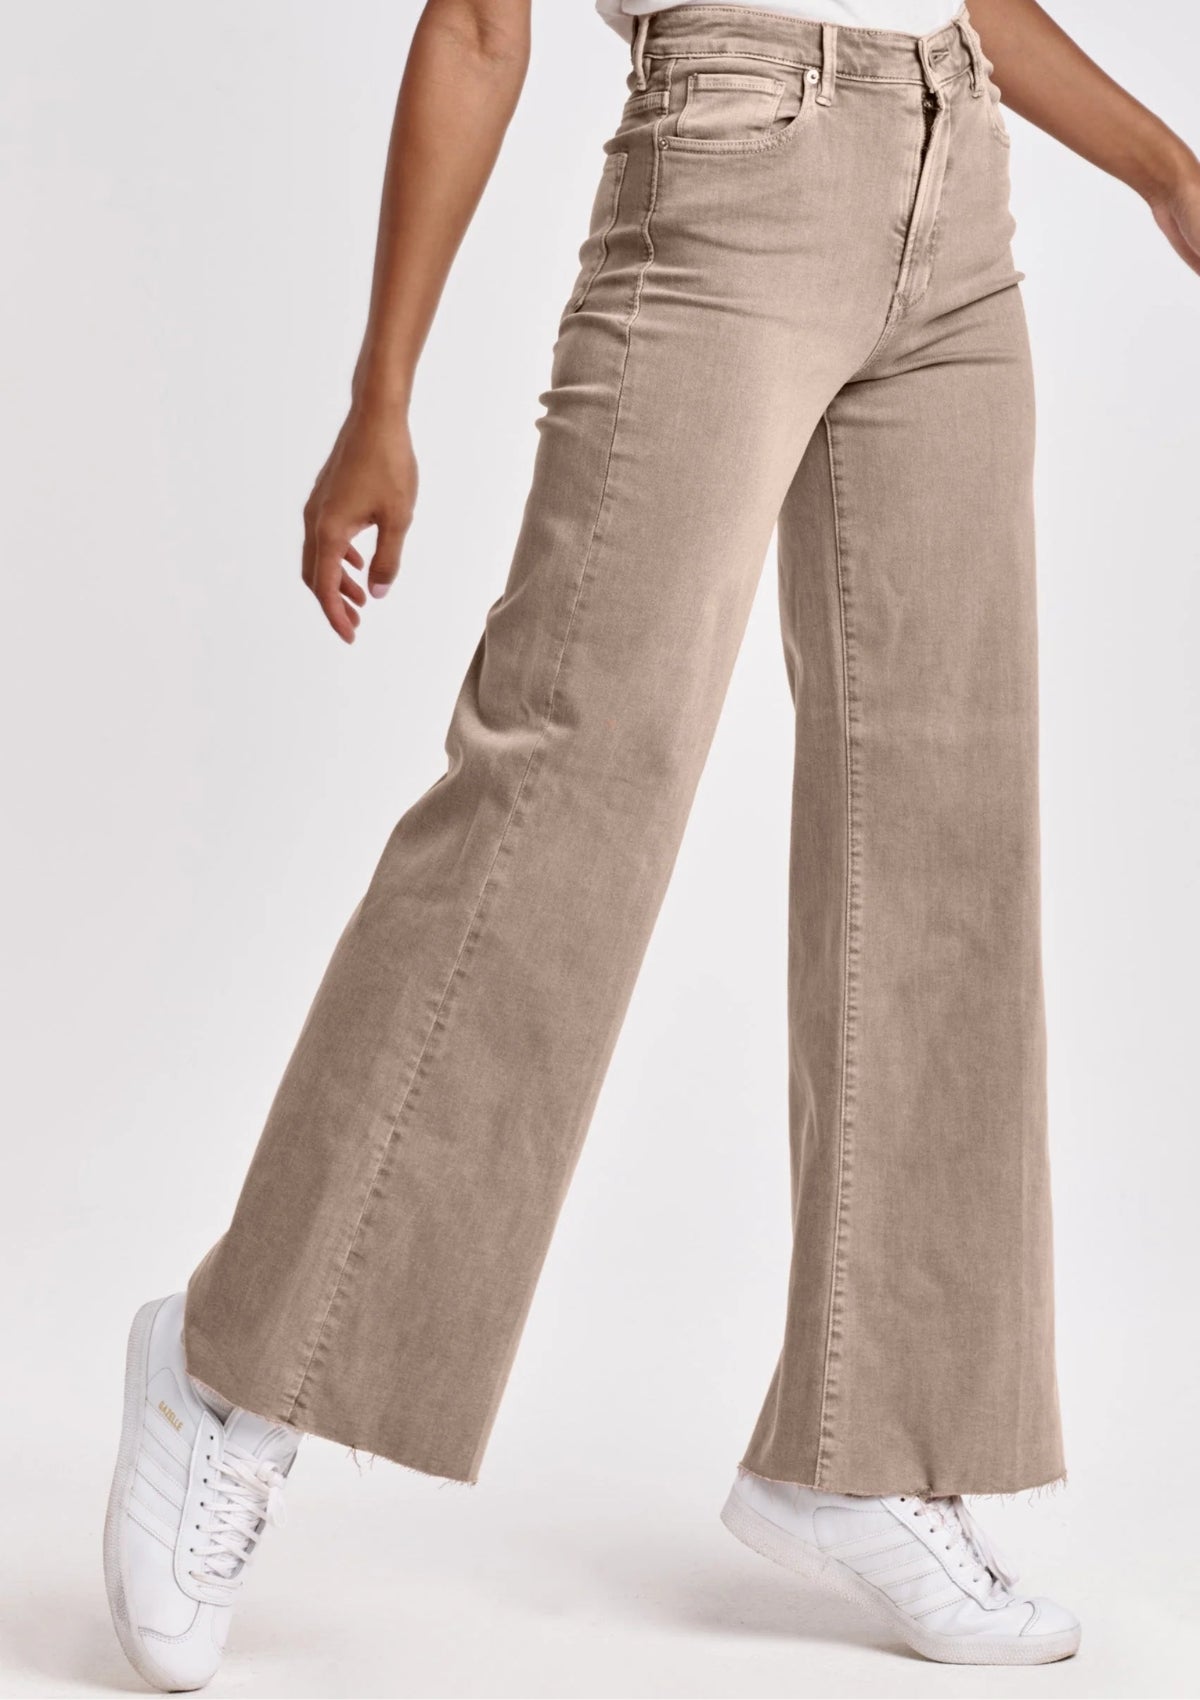 Cashmere light tan jeans with wide legs. Paired with white tee and white sneakers.